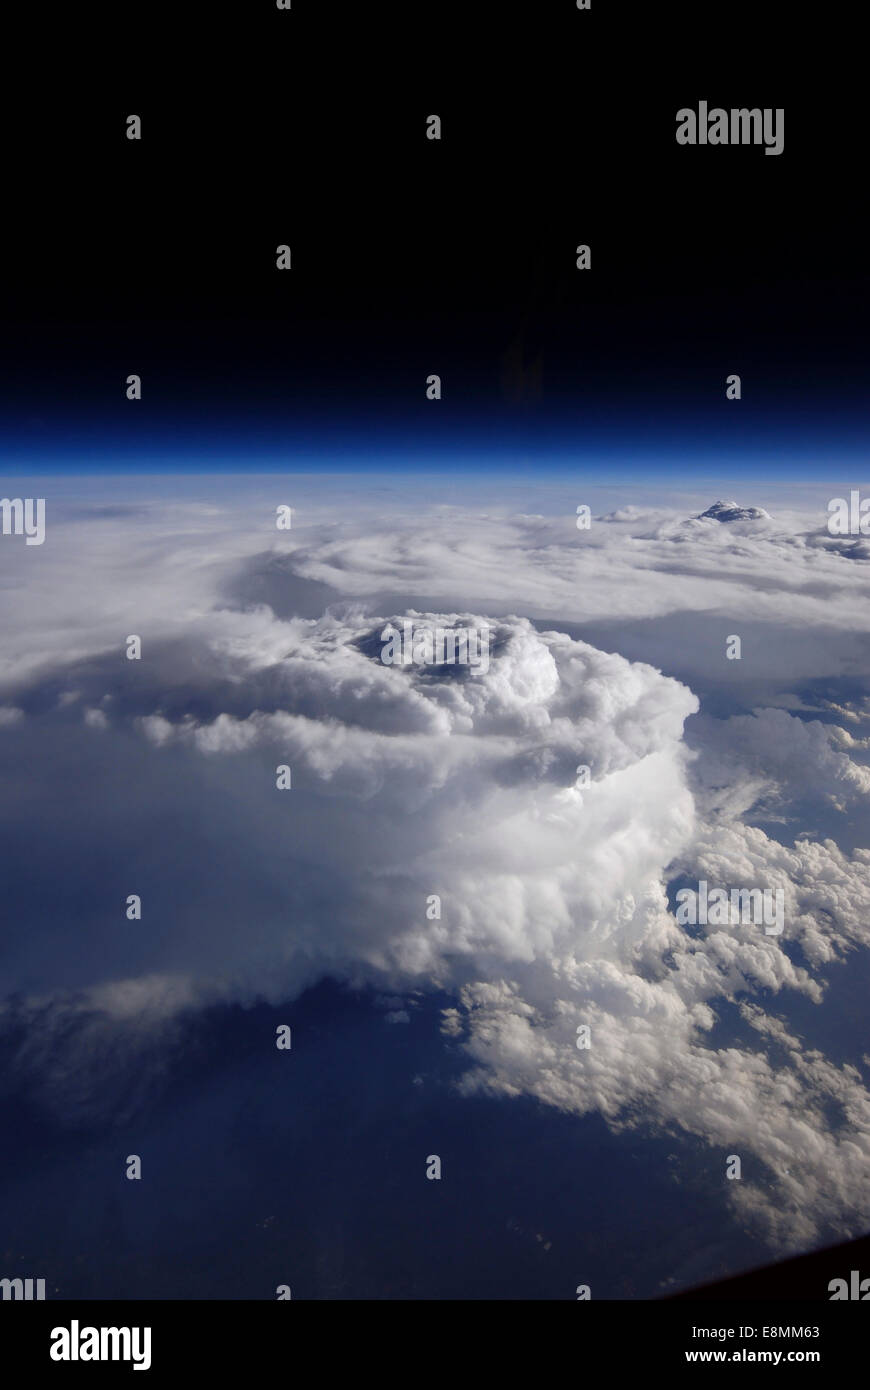 May 23, 2014 - View of a storm cell taken from NASA's high-altitude ER-2 aircraft. Stock Photo